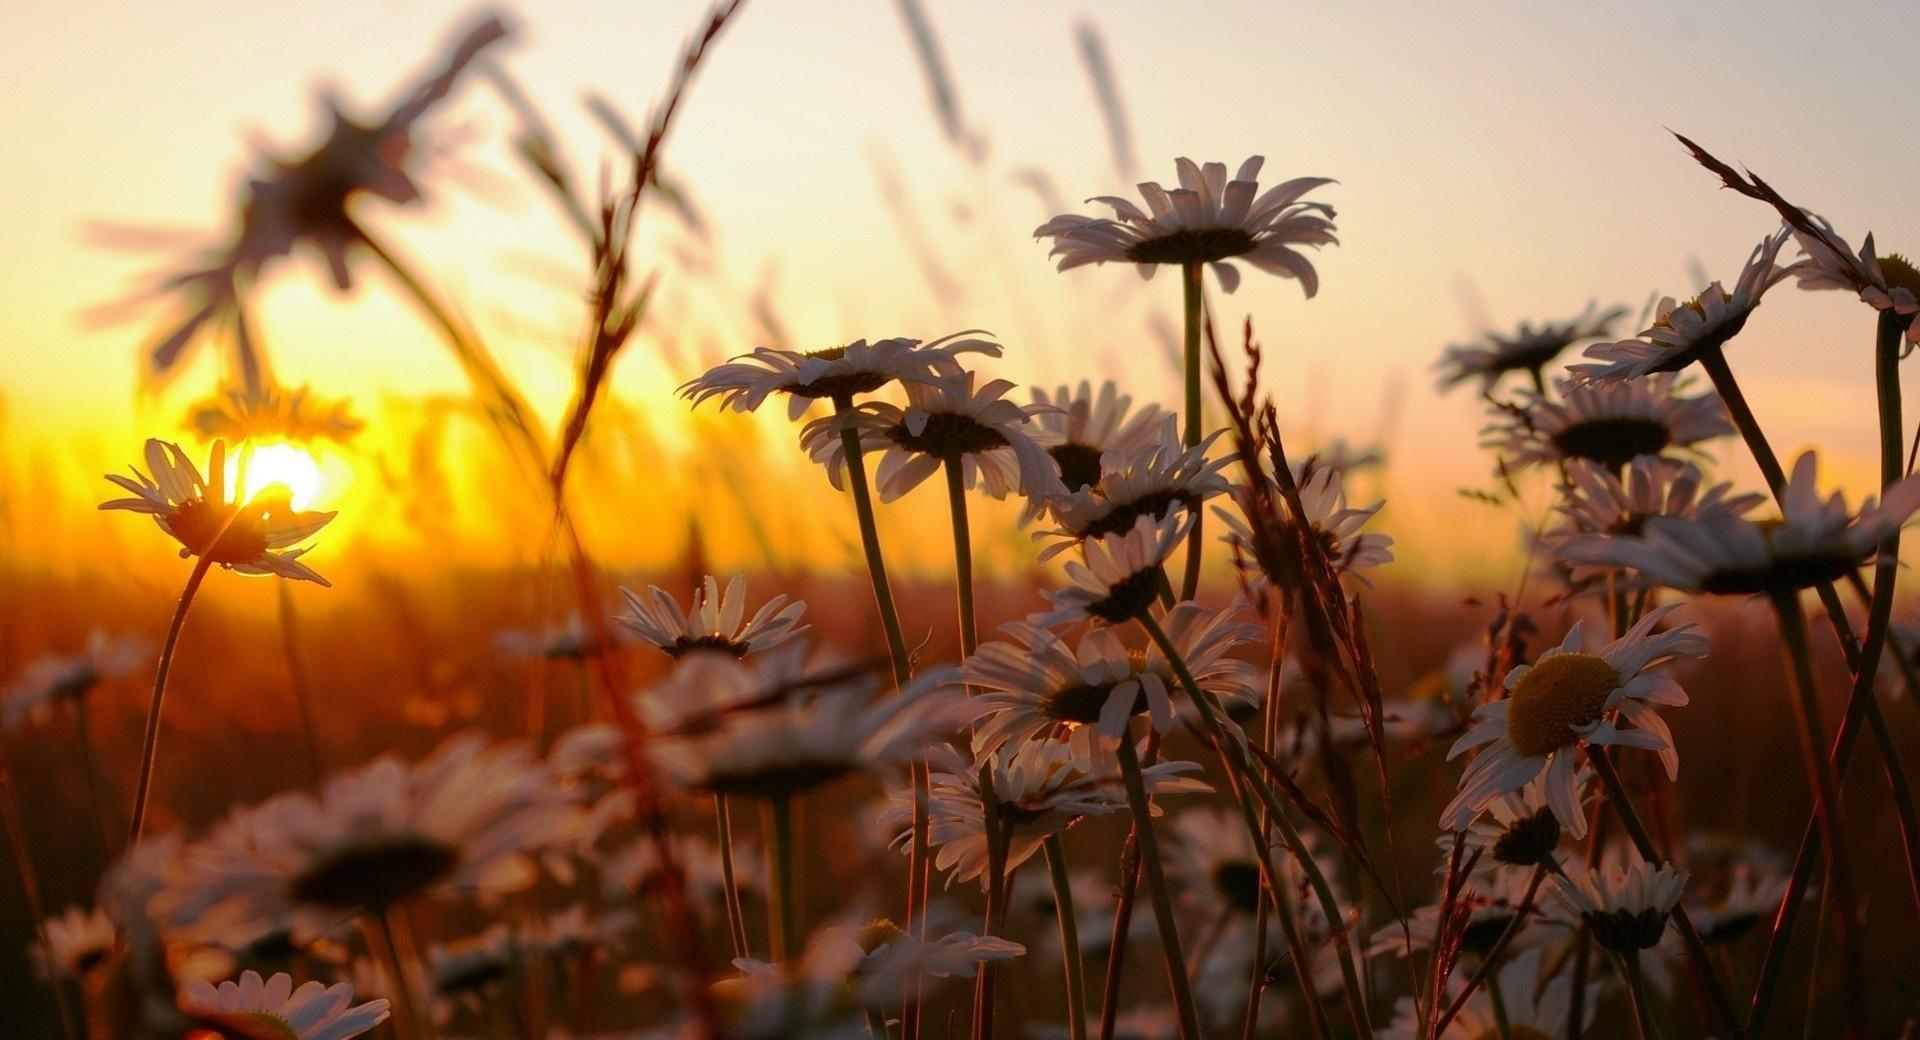 Daisies At Sunset wallpapers HD quality